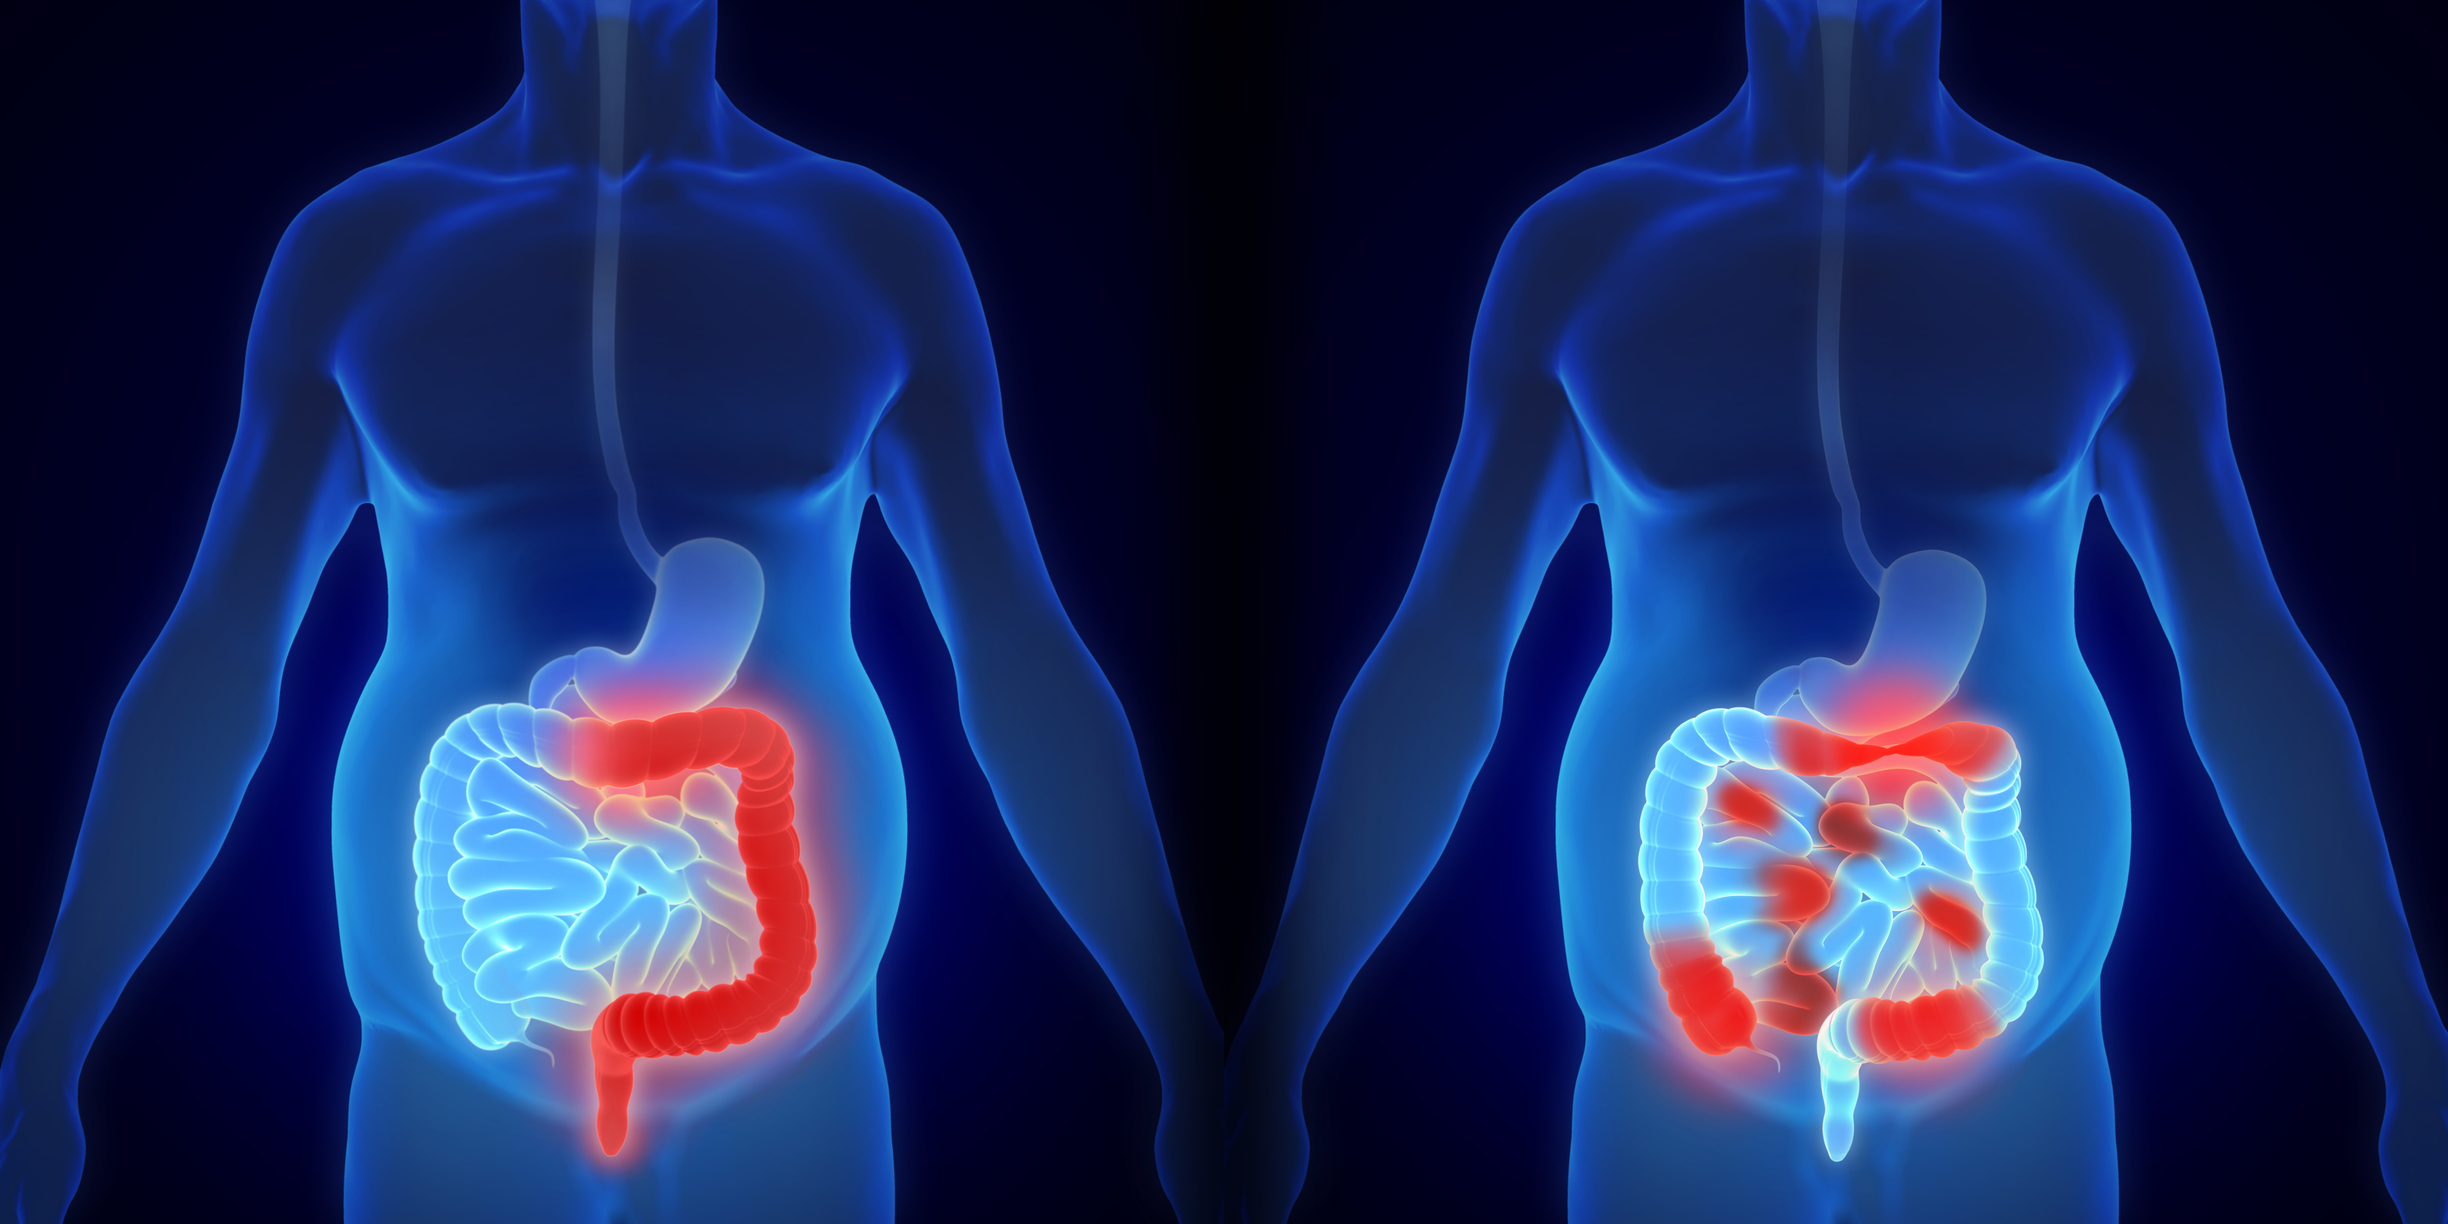 Two 3d images of a human body and intestines, one with Crohn's disease, the other with ulcerative colitis. 